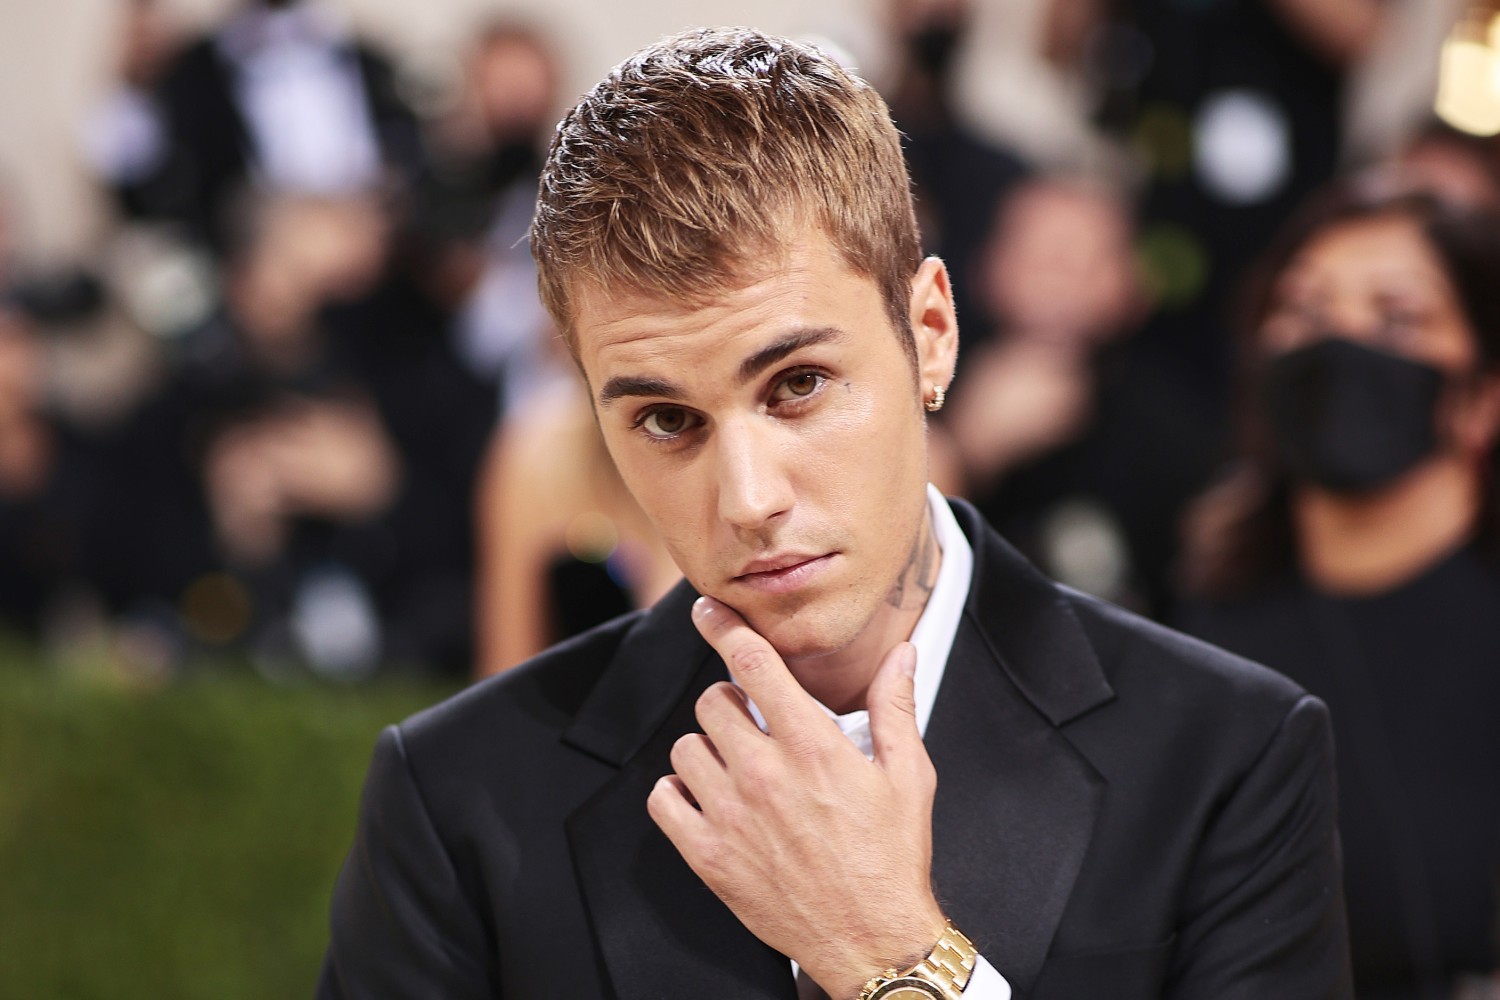 Justin Bieber sells rights to his music back catalog